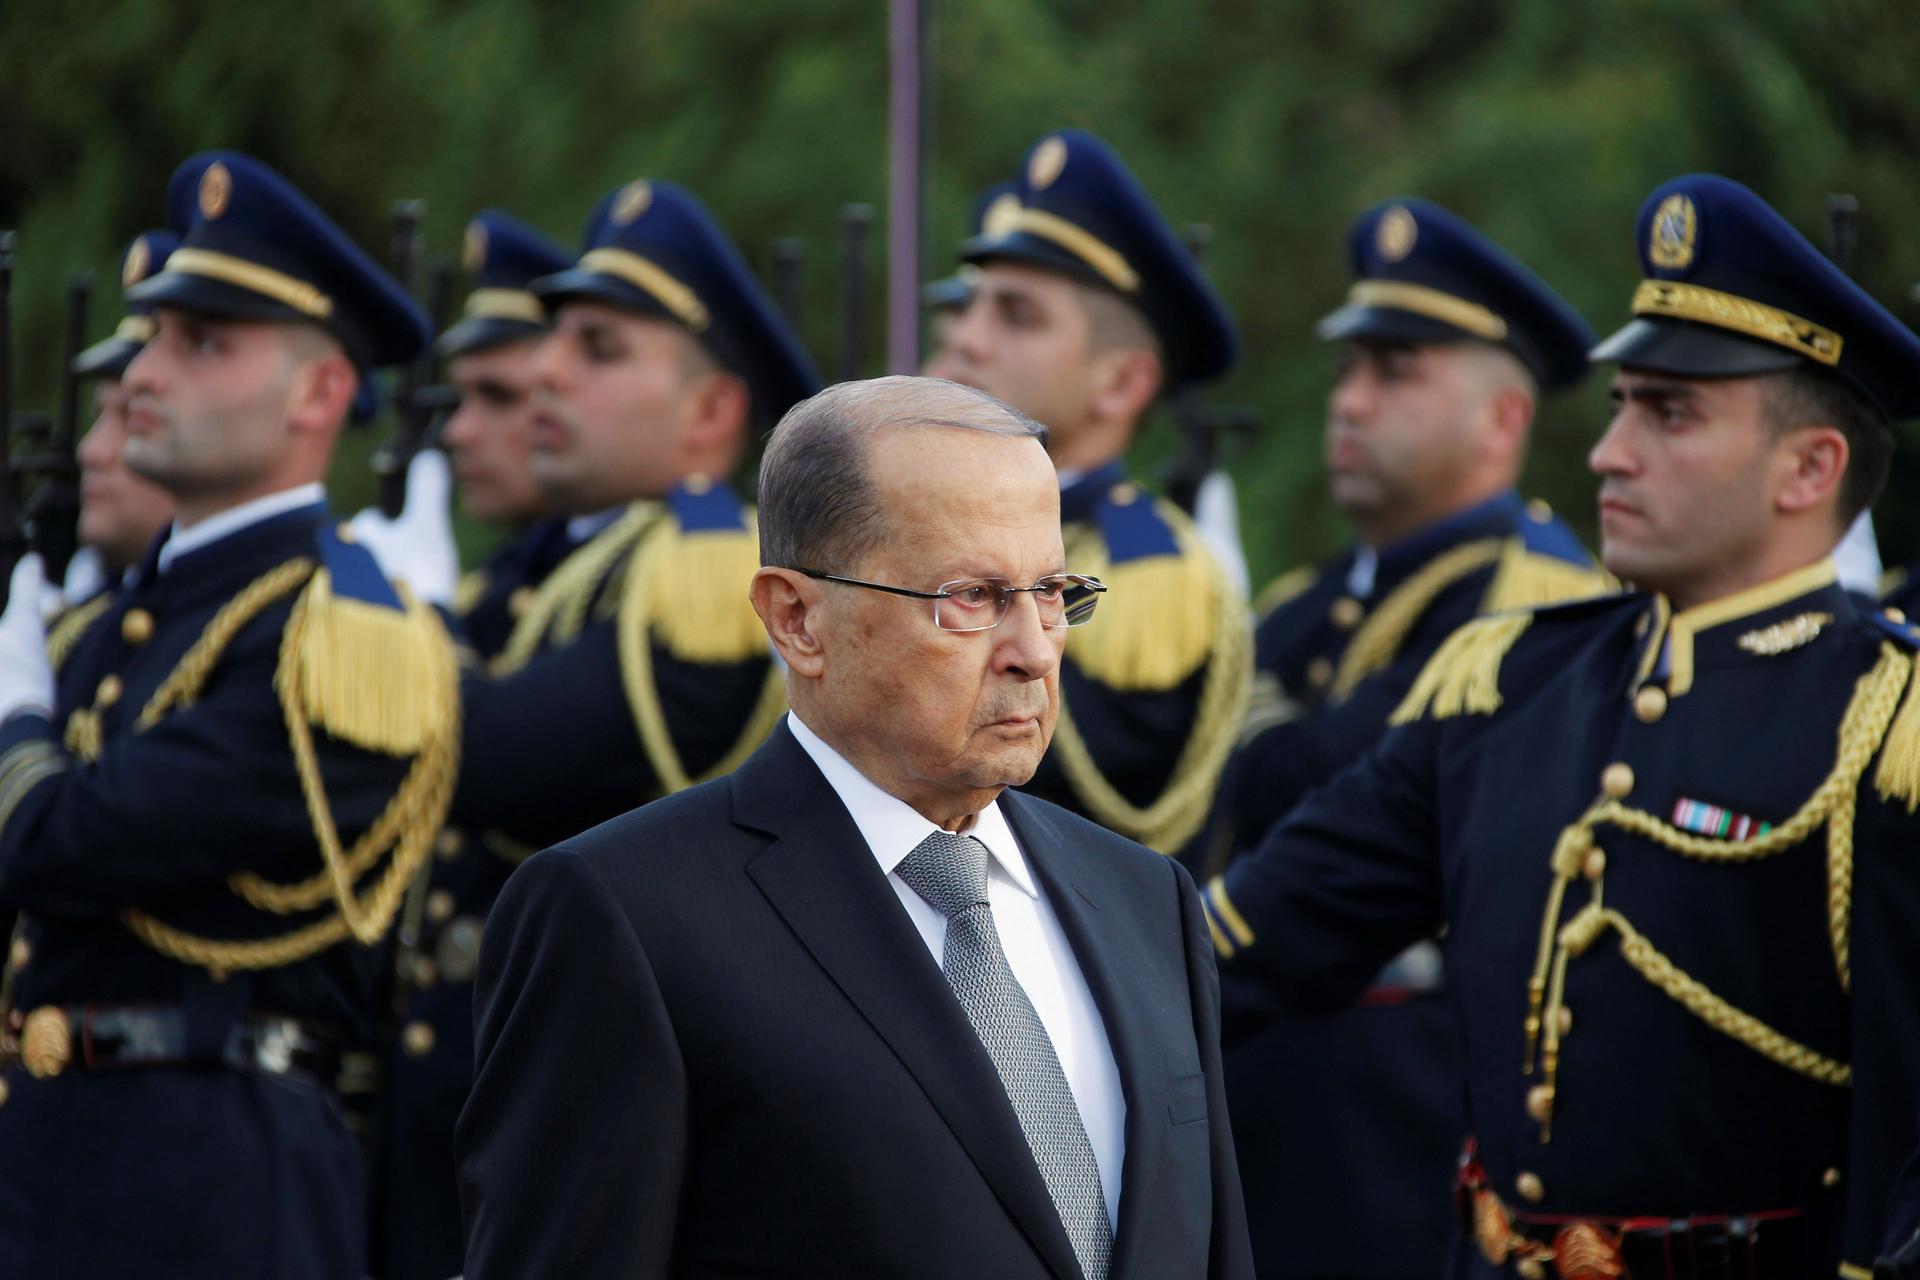 Newly elected Lebanese President Michel Aoun arrives at the presidential palace in Baabda, near Beirut, Lebanon on Oct. 31.